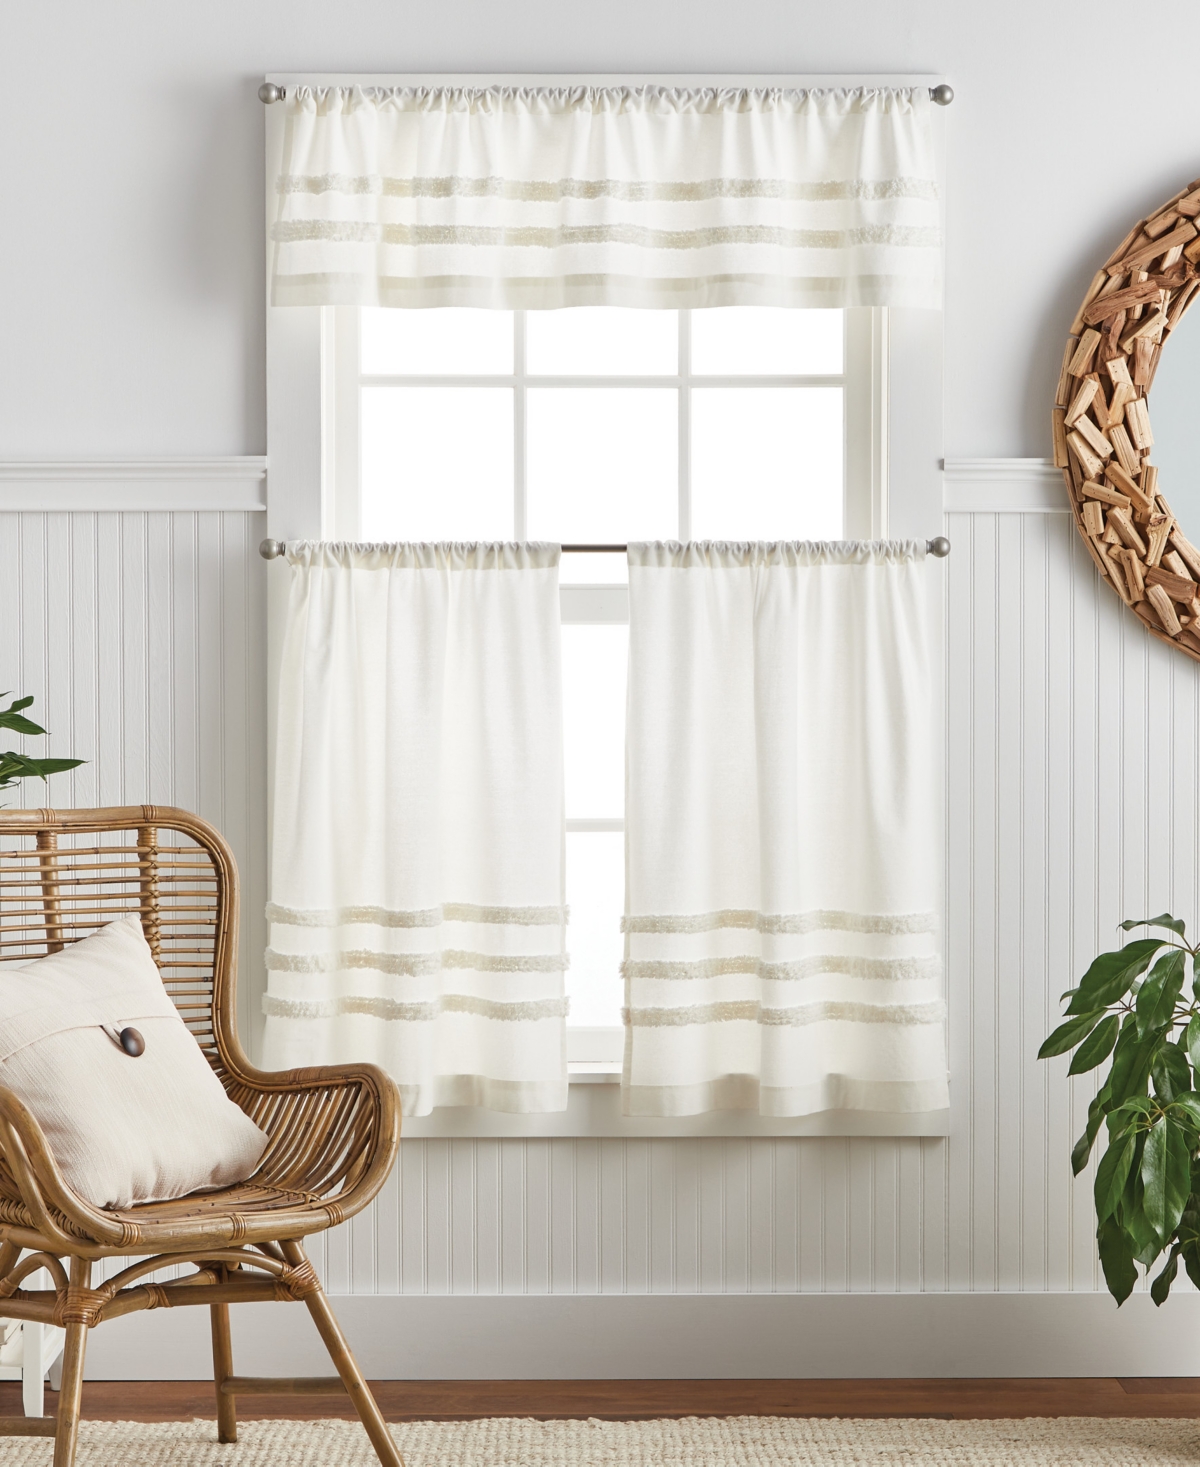 Water's Edge Backtab Tufted Valance & Tiers Set, Created For Macy's - White